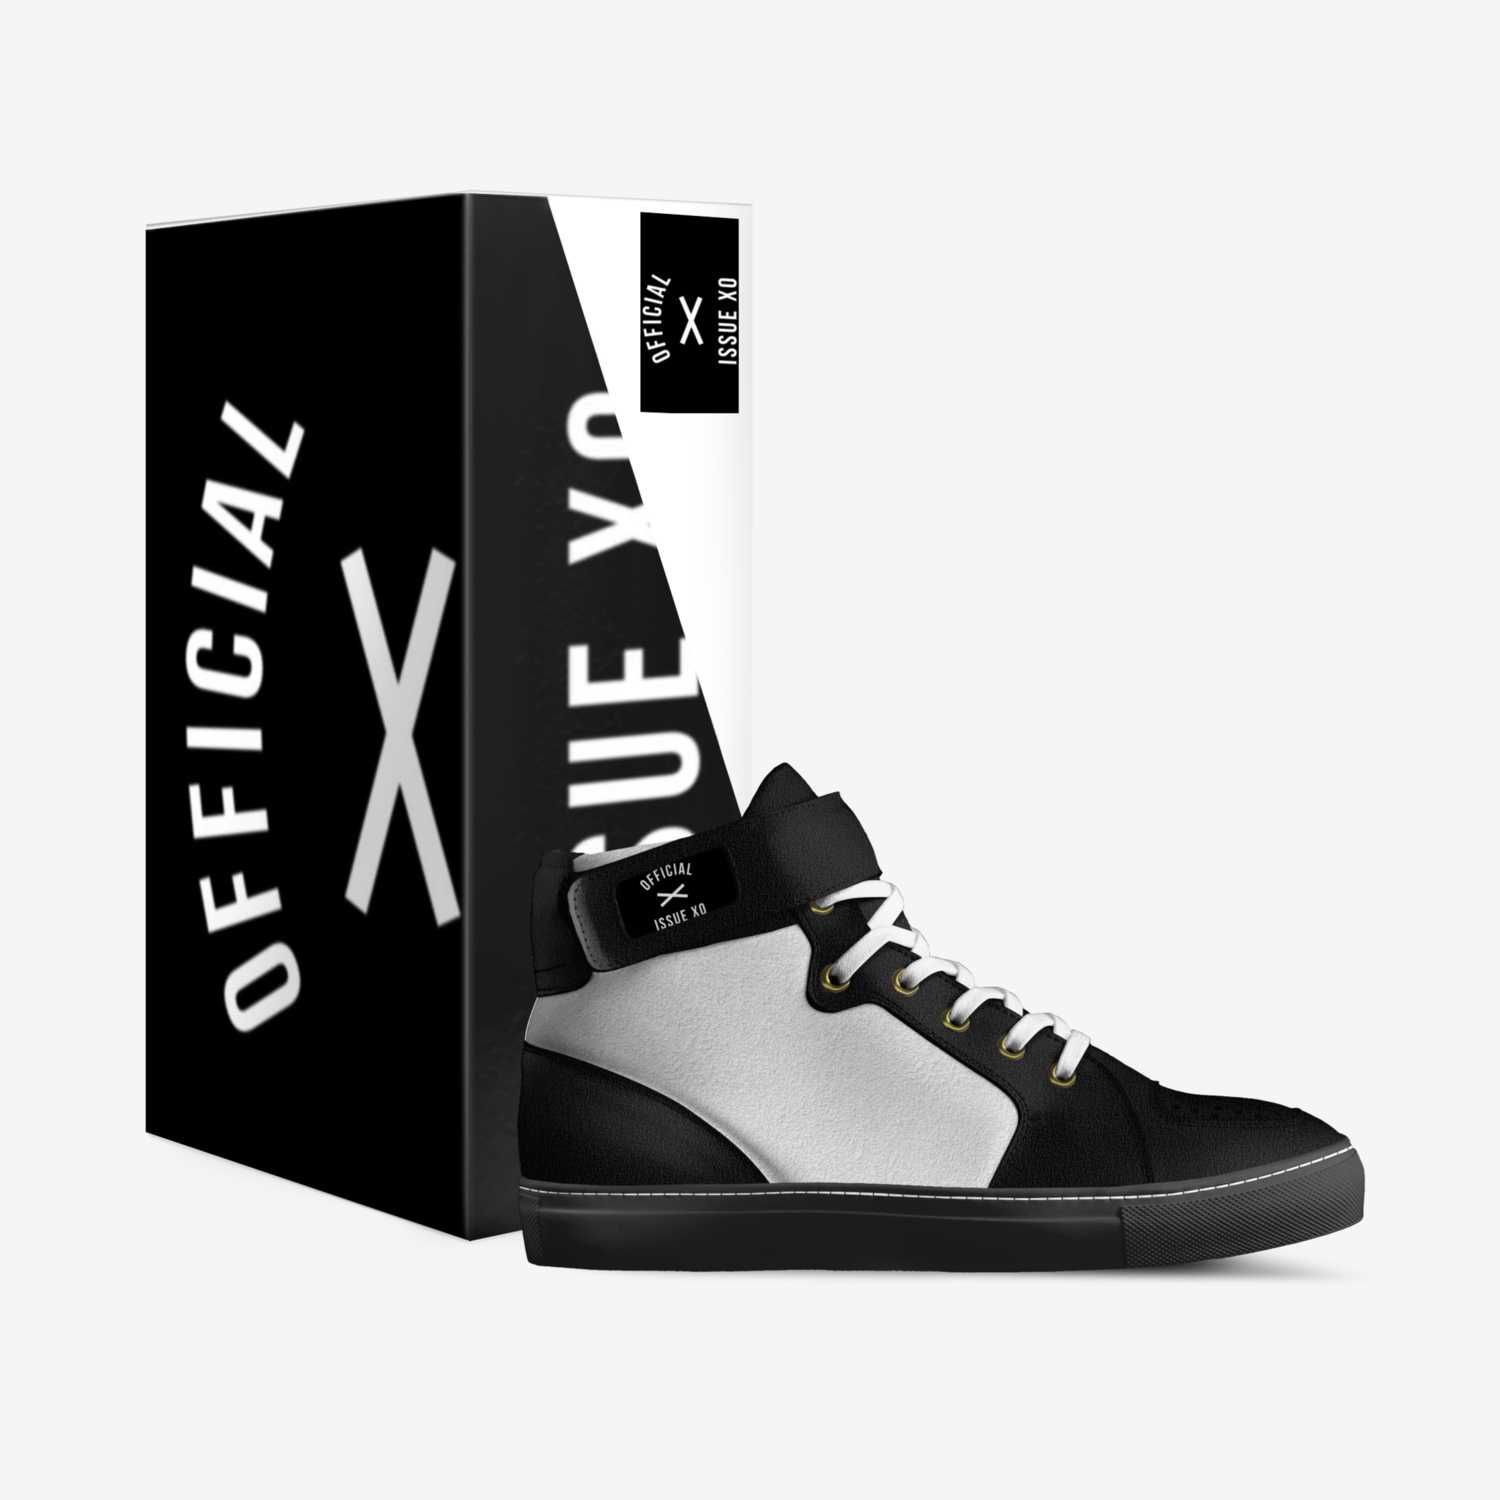 The Weeknd Shoes A shoe concept by Rebel Willams